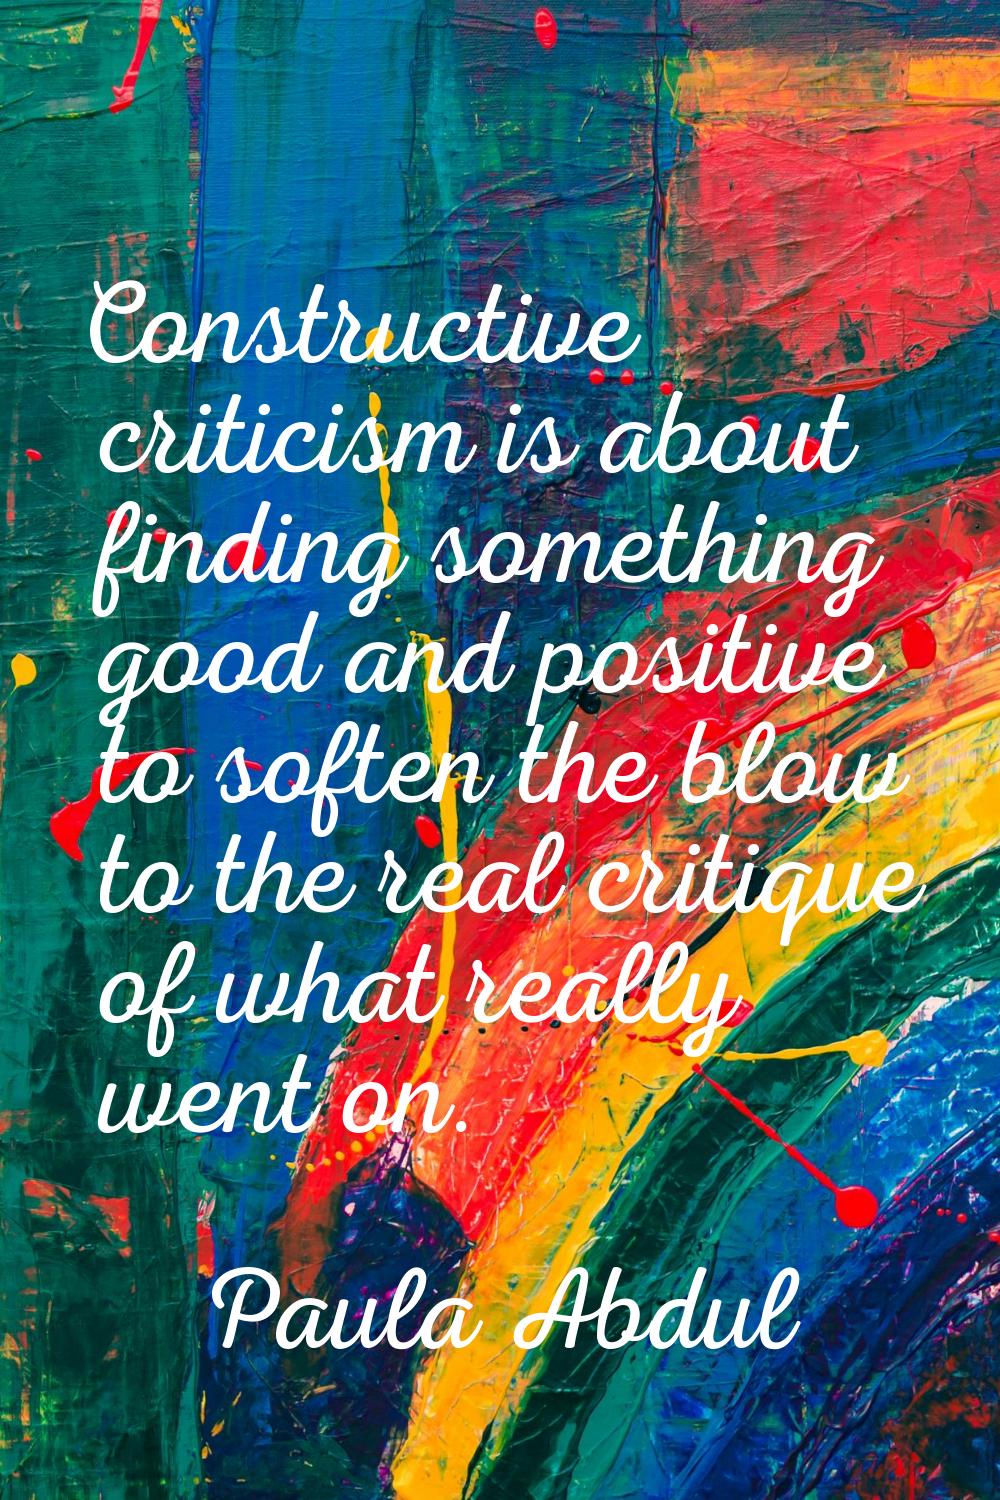 Constructive criticism is about finding something good and positive to soften the blow to the real 